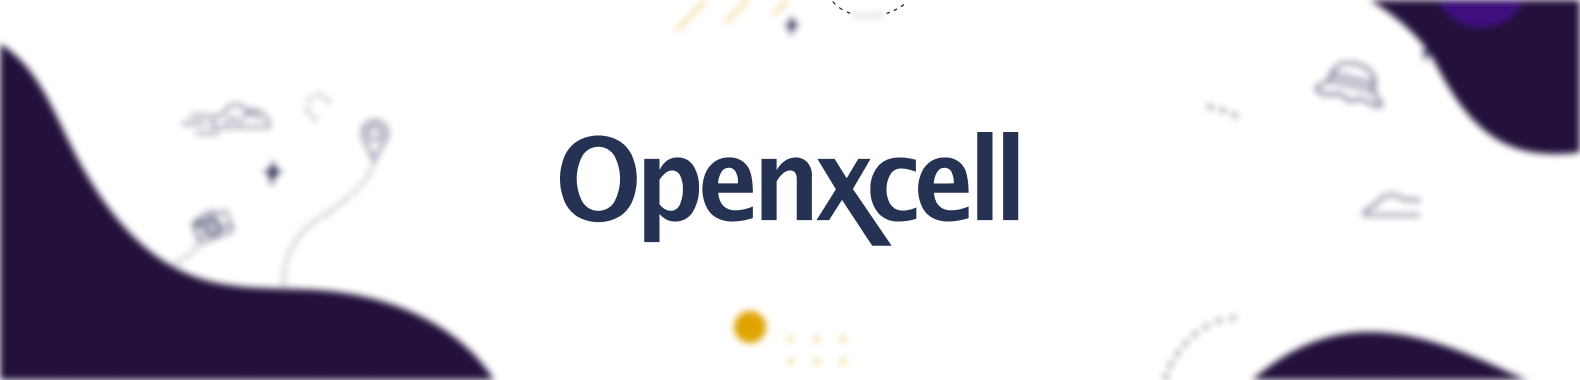 OPENXCELL (1)